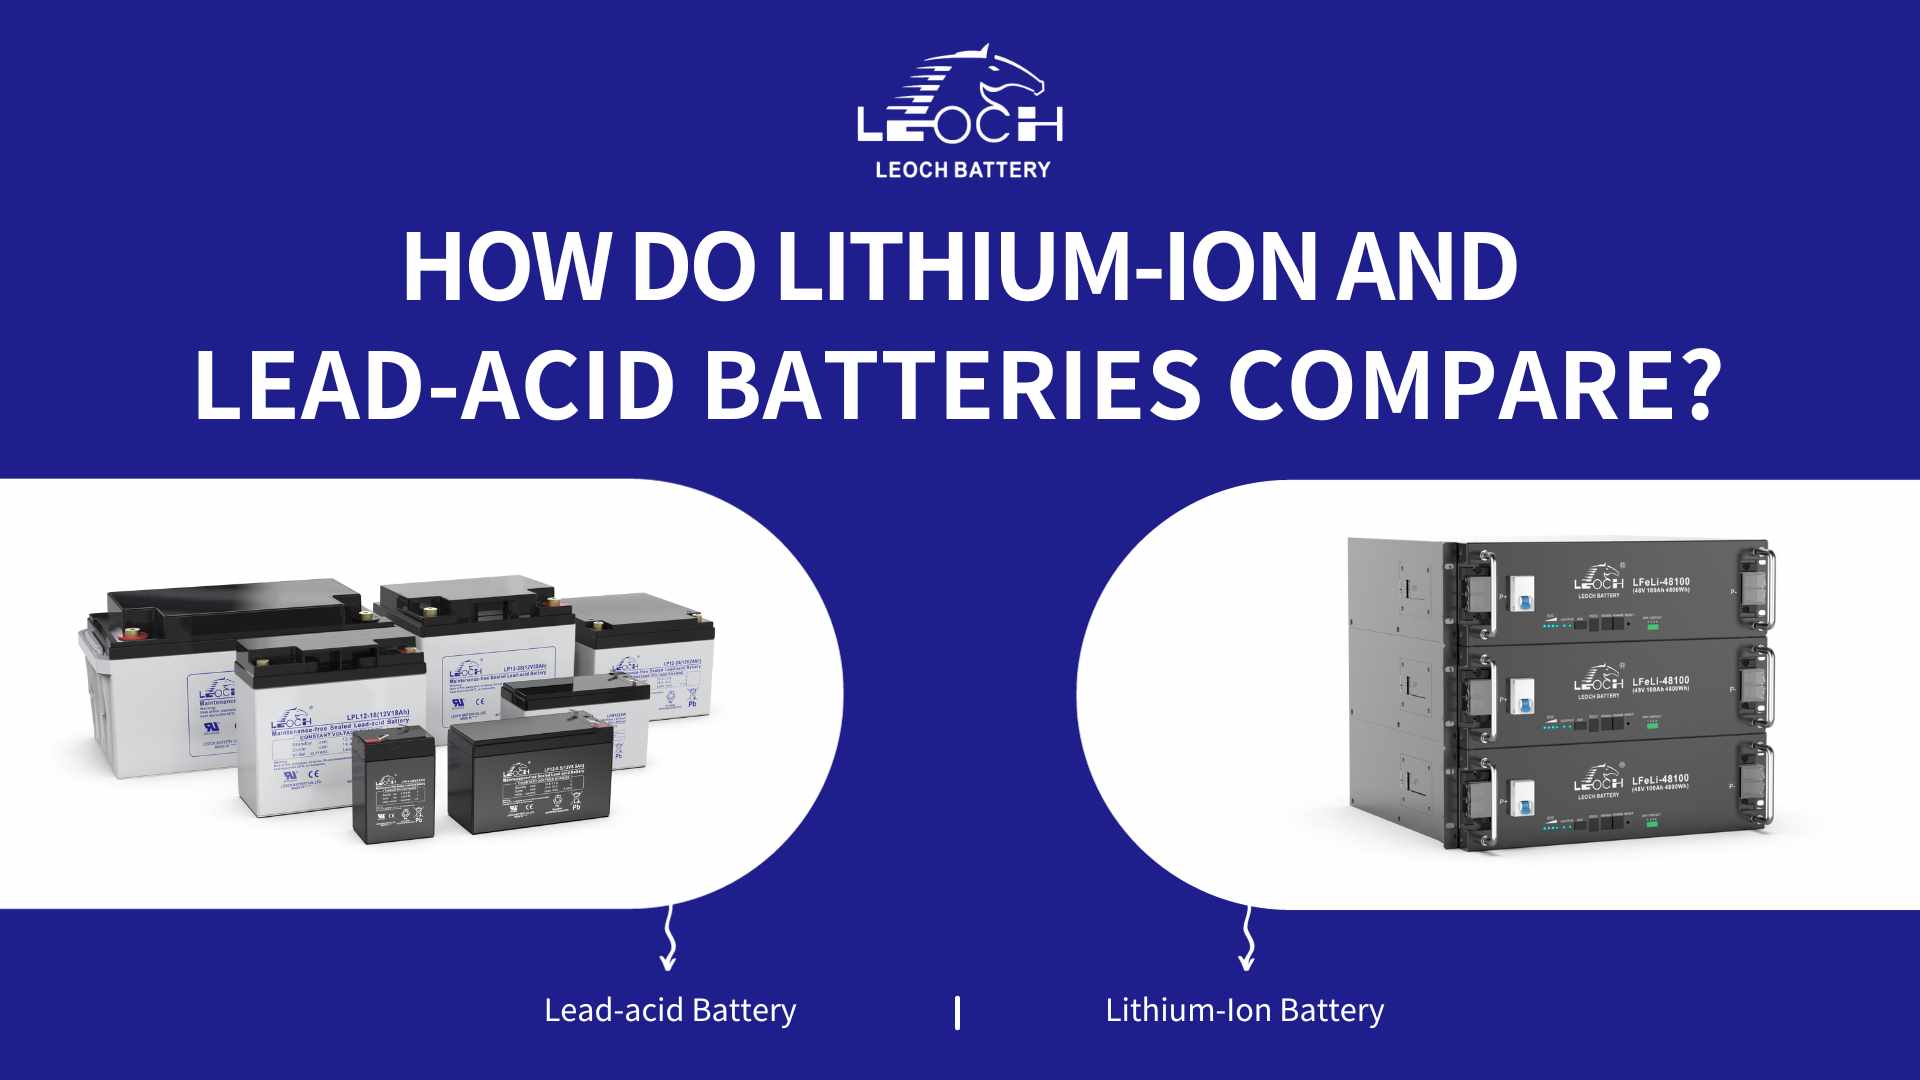 How do lithium-ion and lead-acid batteries compare?